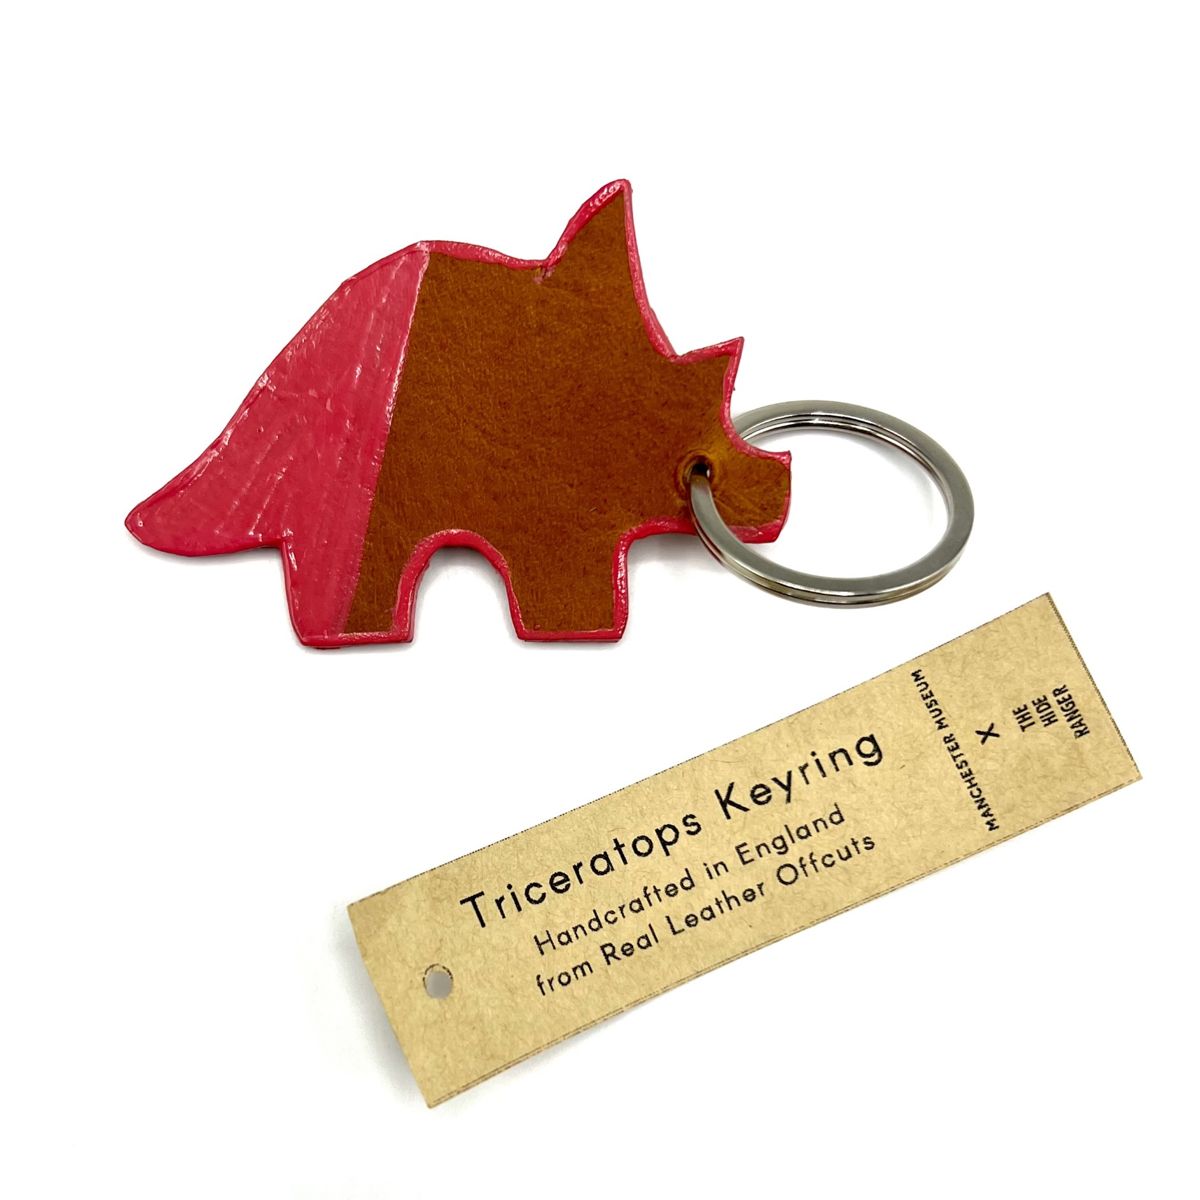 A Triceratops shaped keyring. The tail and half of the hind leg is painted pink and the same pink is painted as an outline around it's body. The keyring is where the eye would be and a paper swing tag is fastened to the keyring with a black safety pin. Tag text: Triceratops keyring. Handcrafted in England from real leather offcuts.